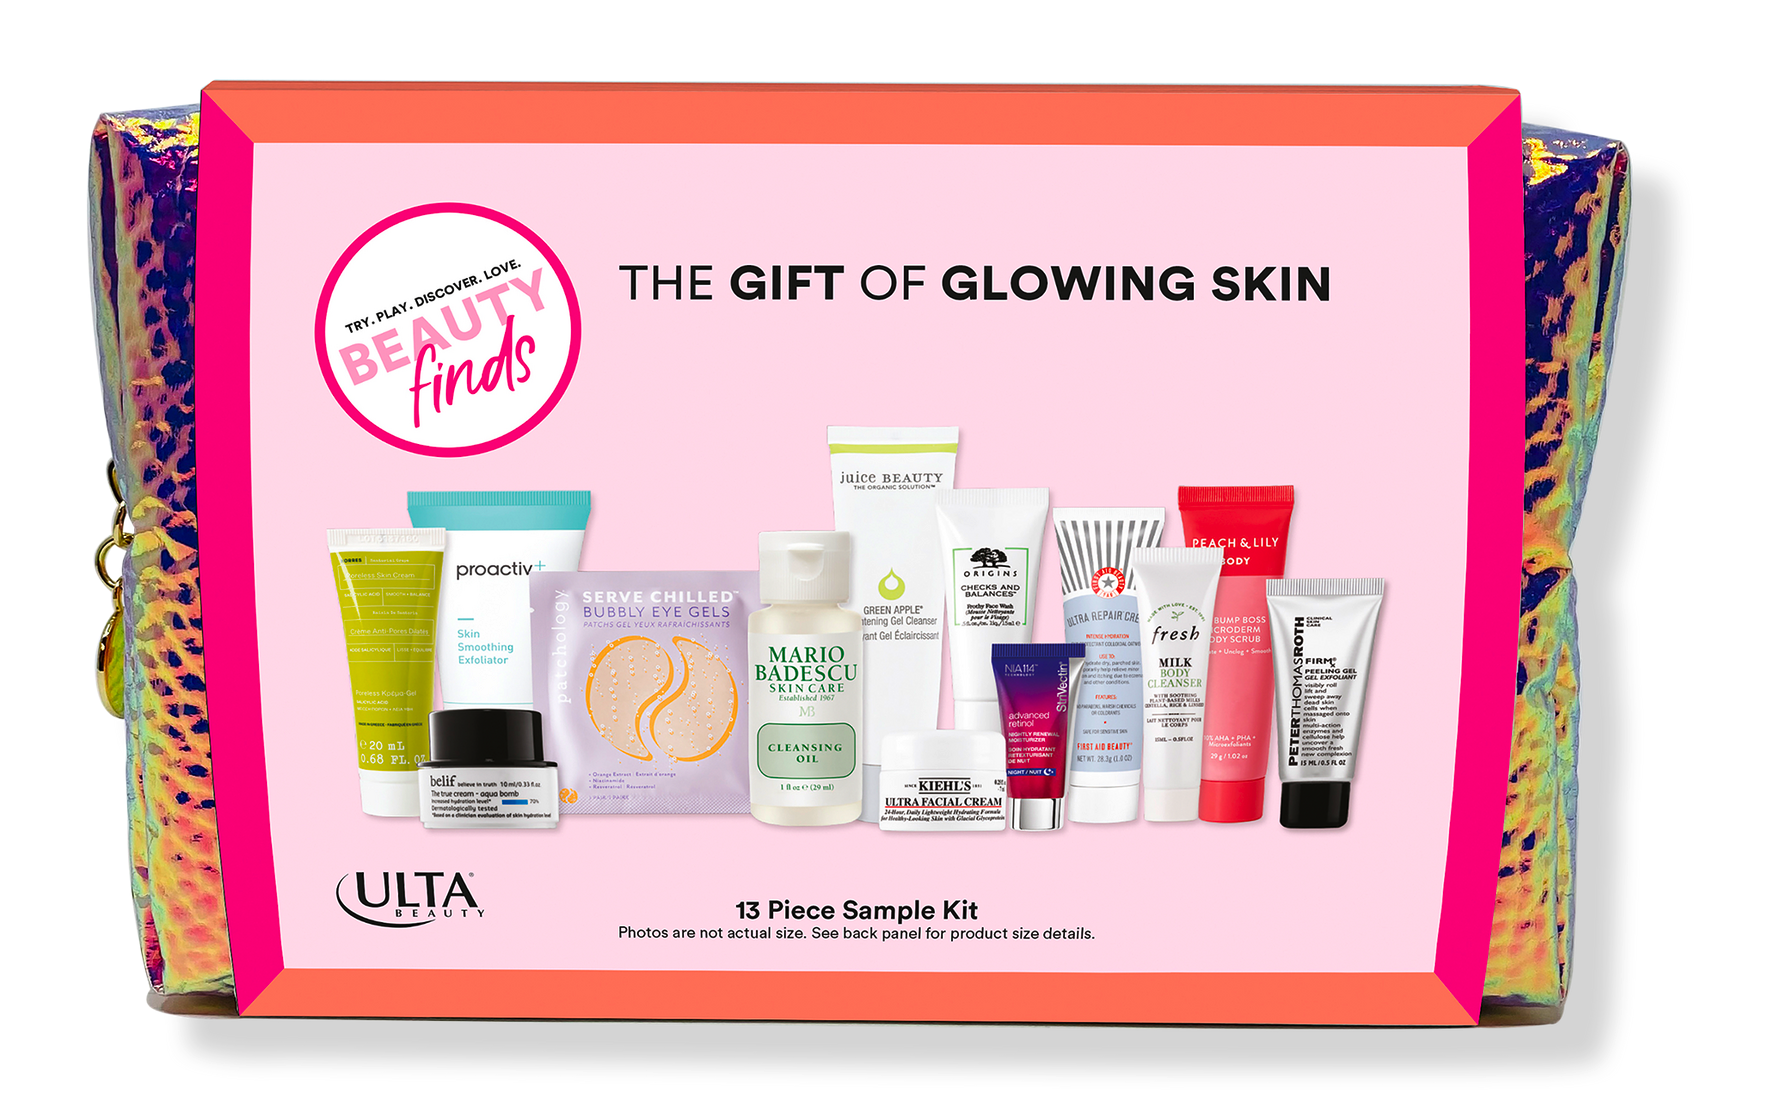 ULTA The Gift of Glowing Skin Kit 13 Favorite Samples For That Glowing